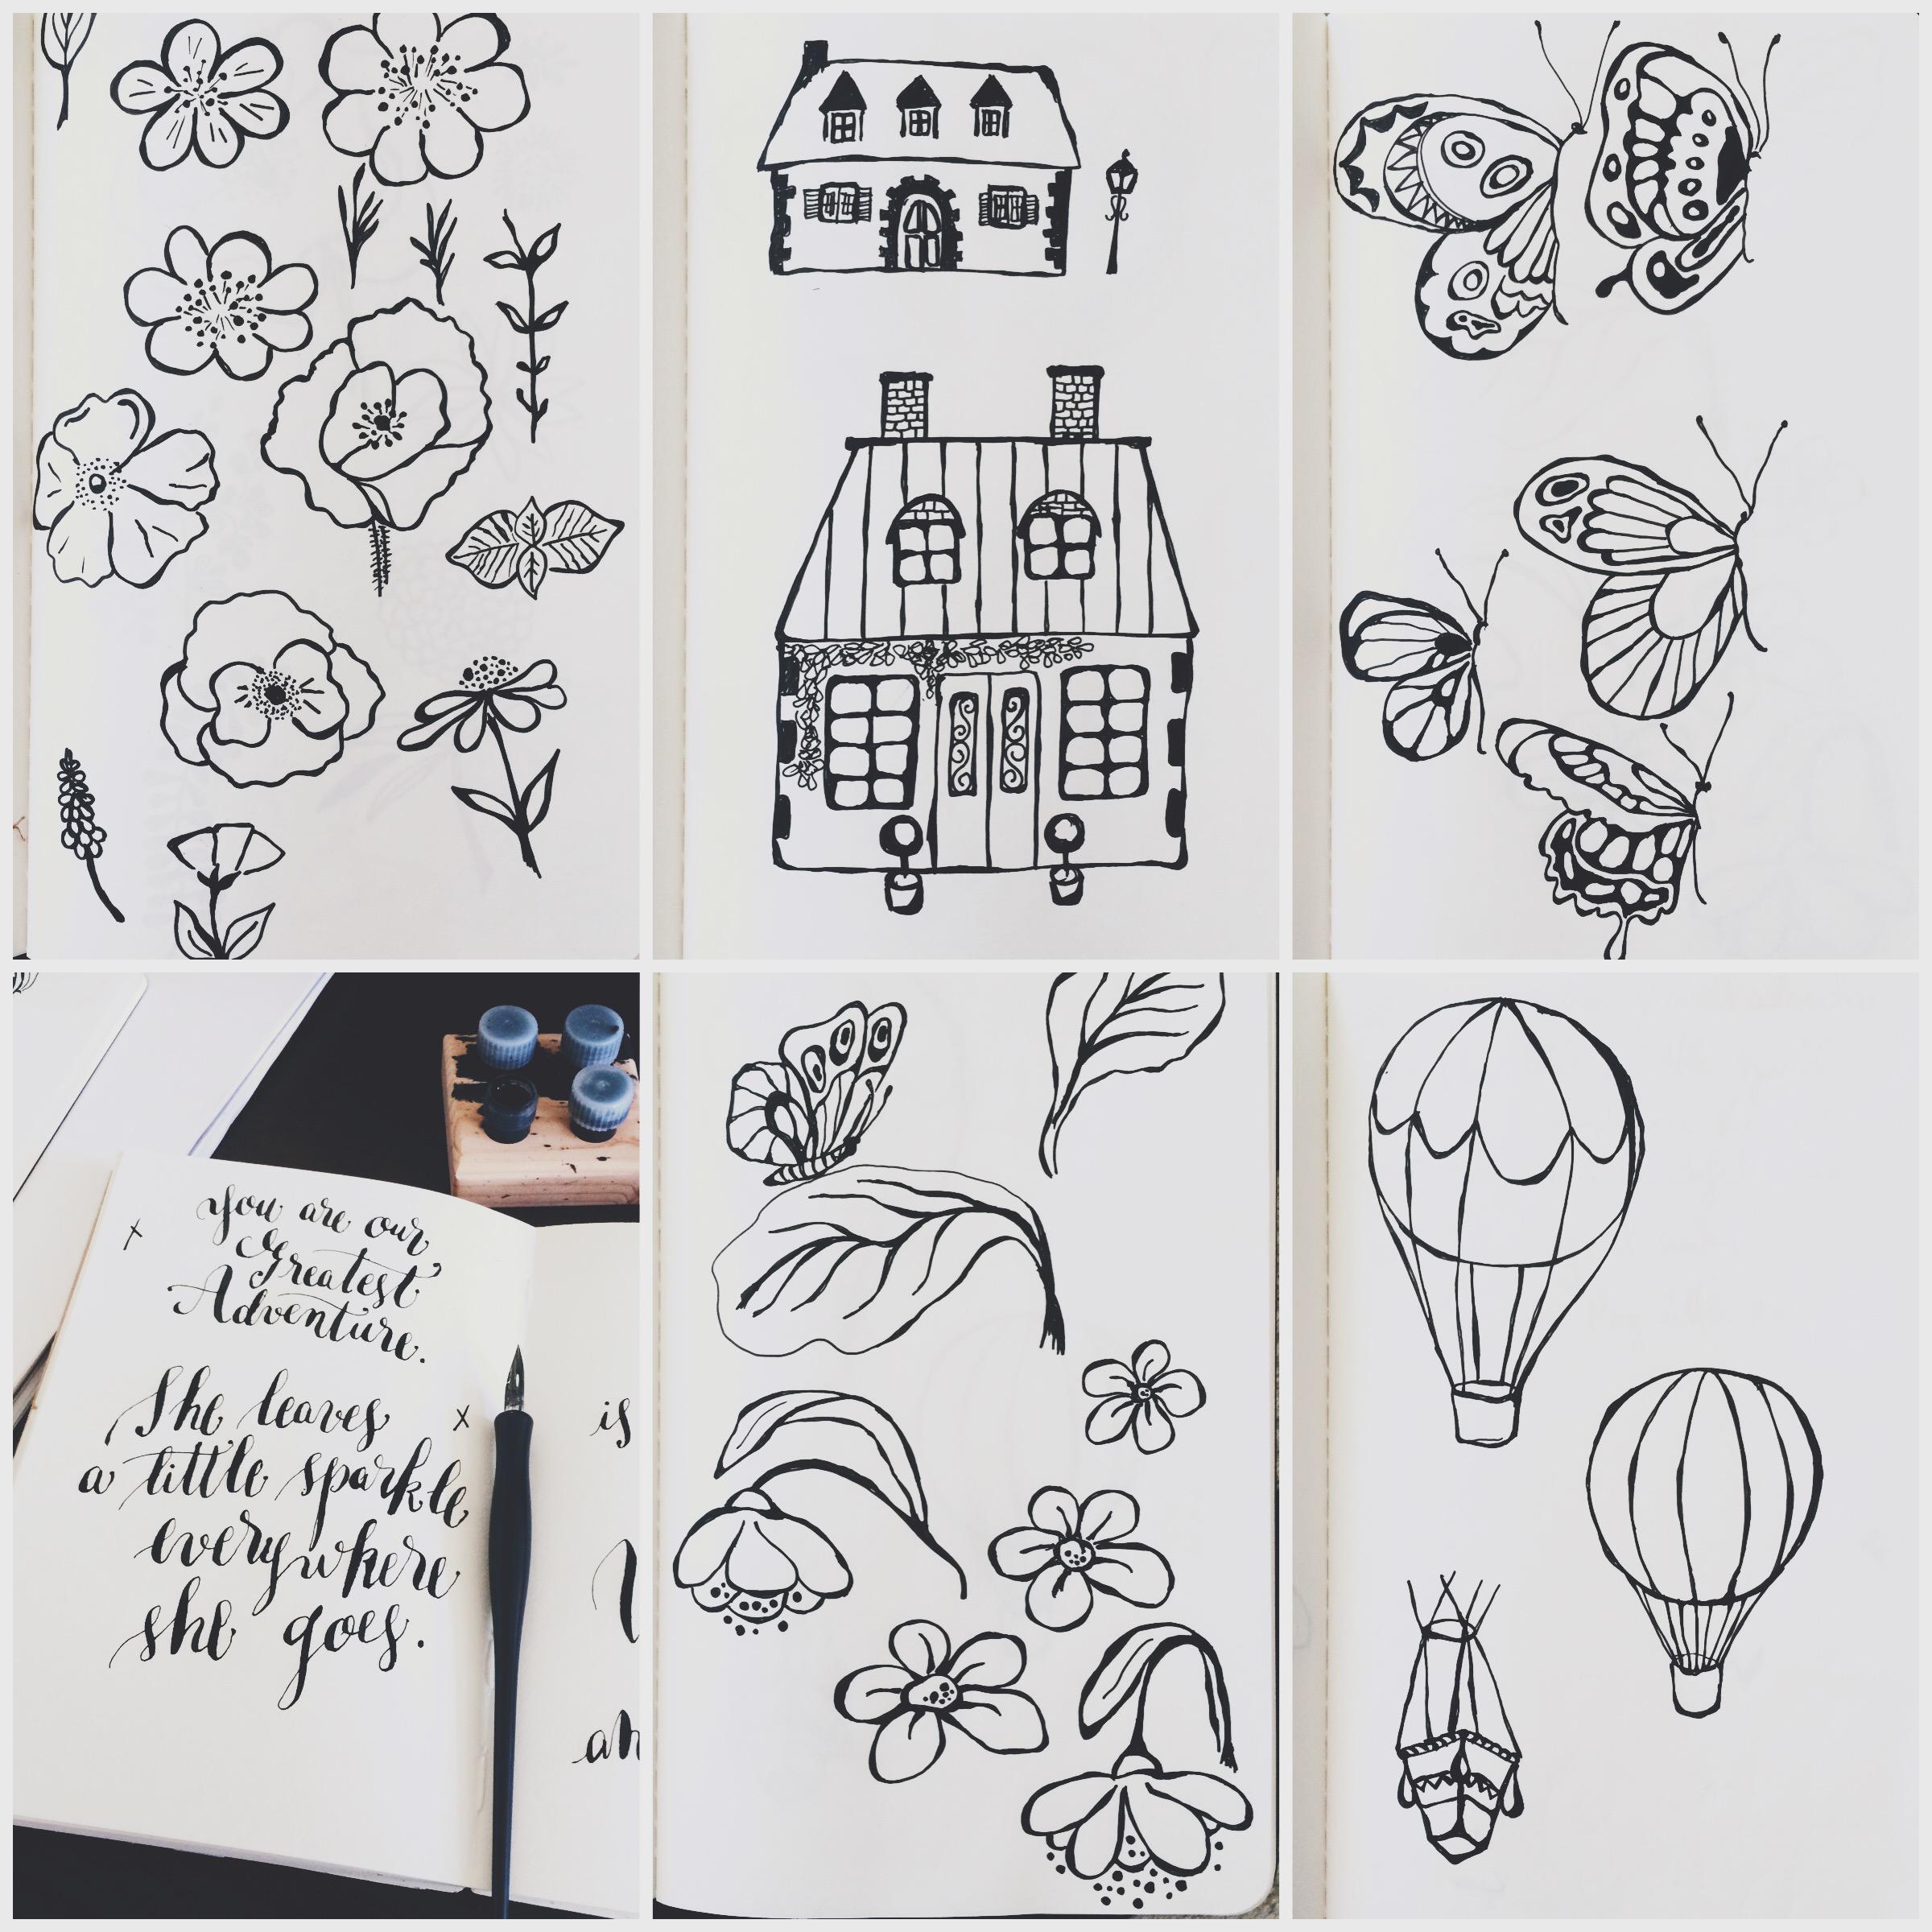 Hand drawn sketches